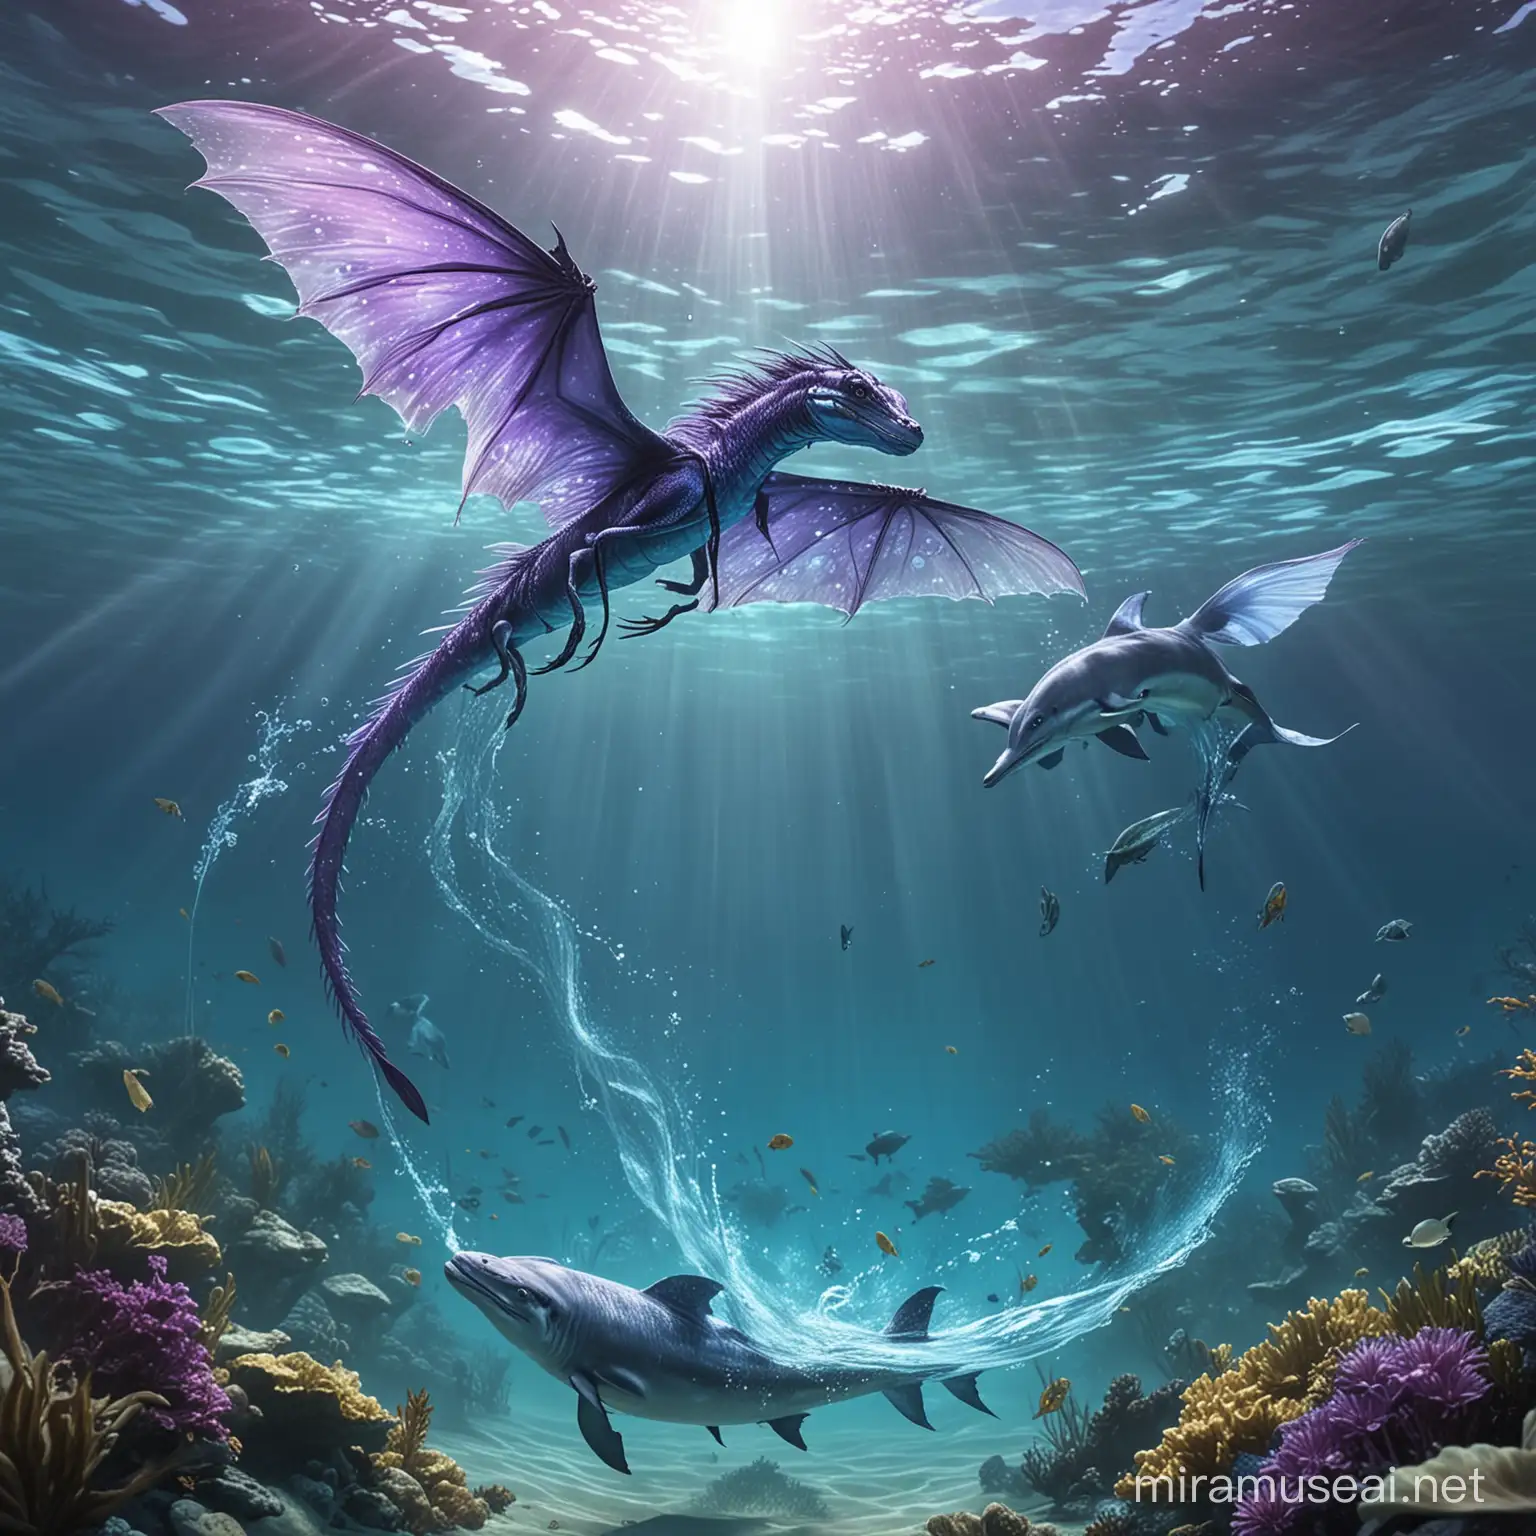 A transparent violet-blue dragon flies out from under the water, followed by a dolphin jumping out of the water after the dragon